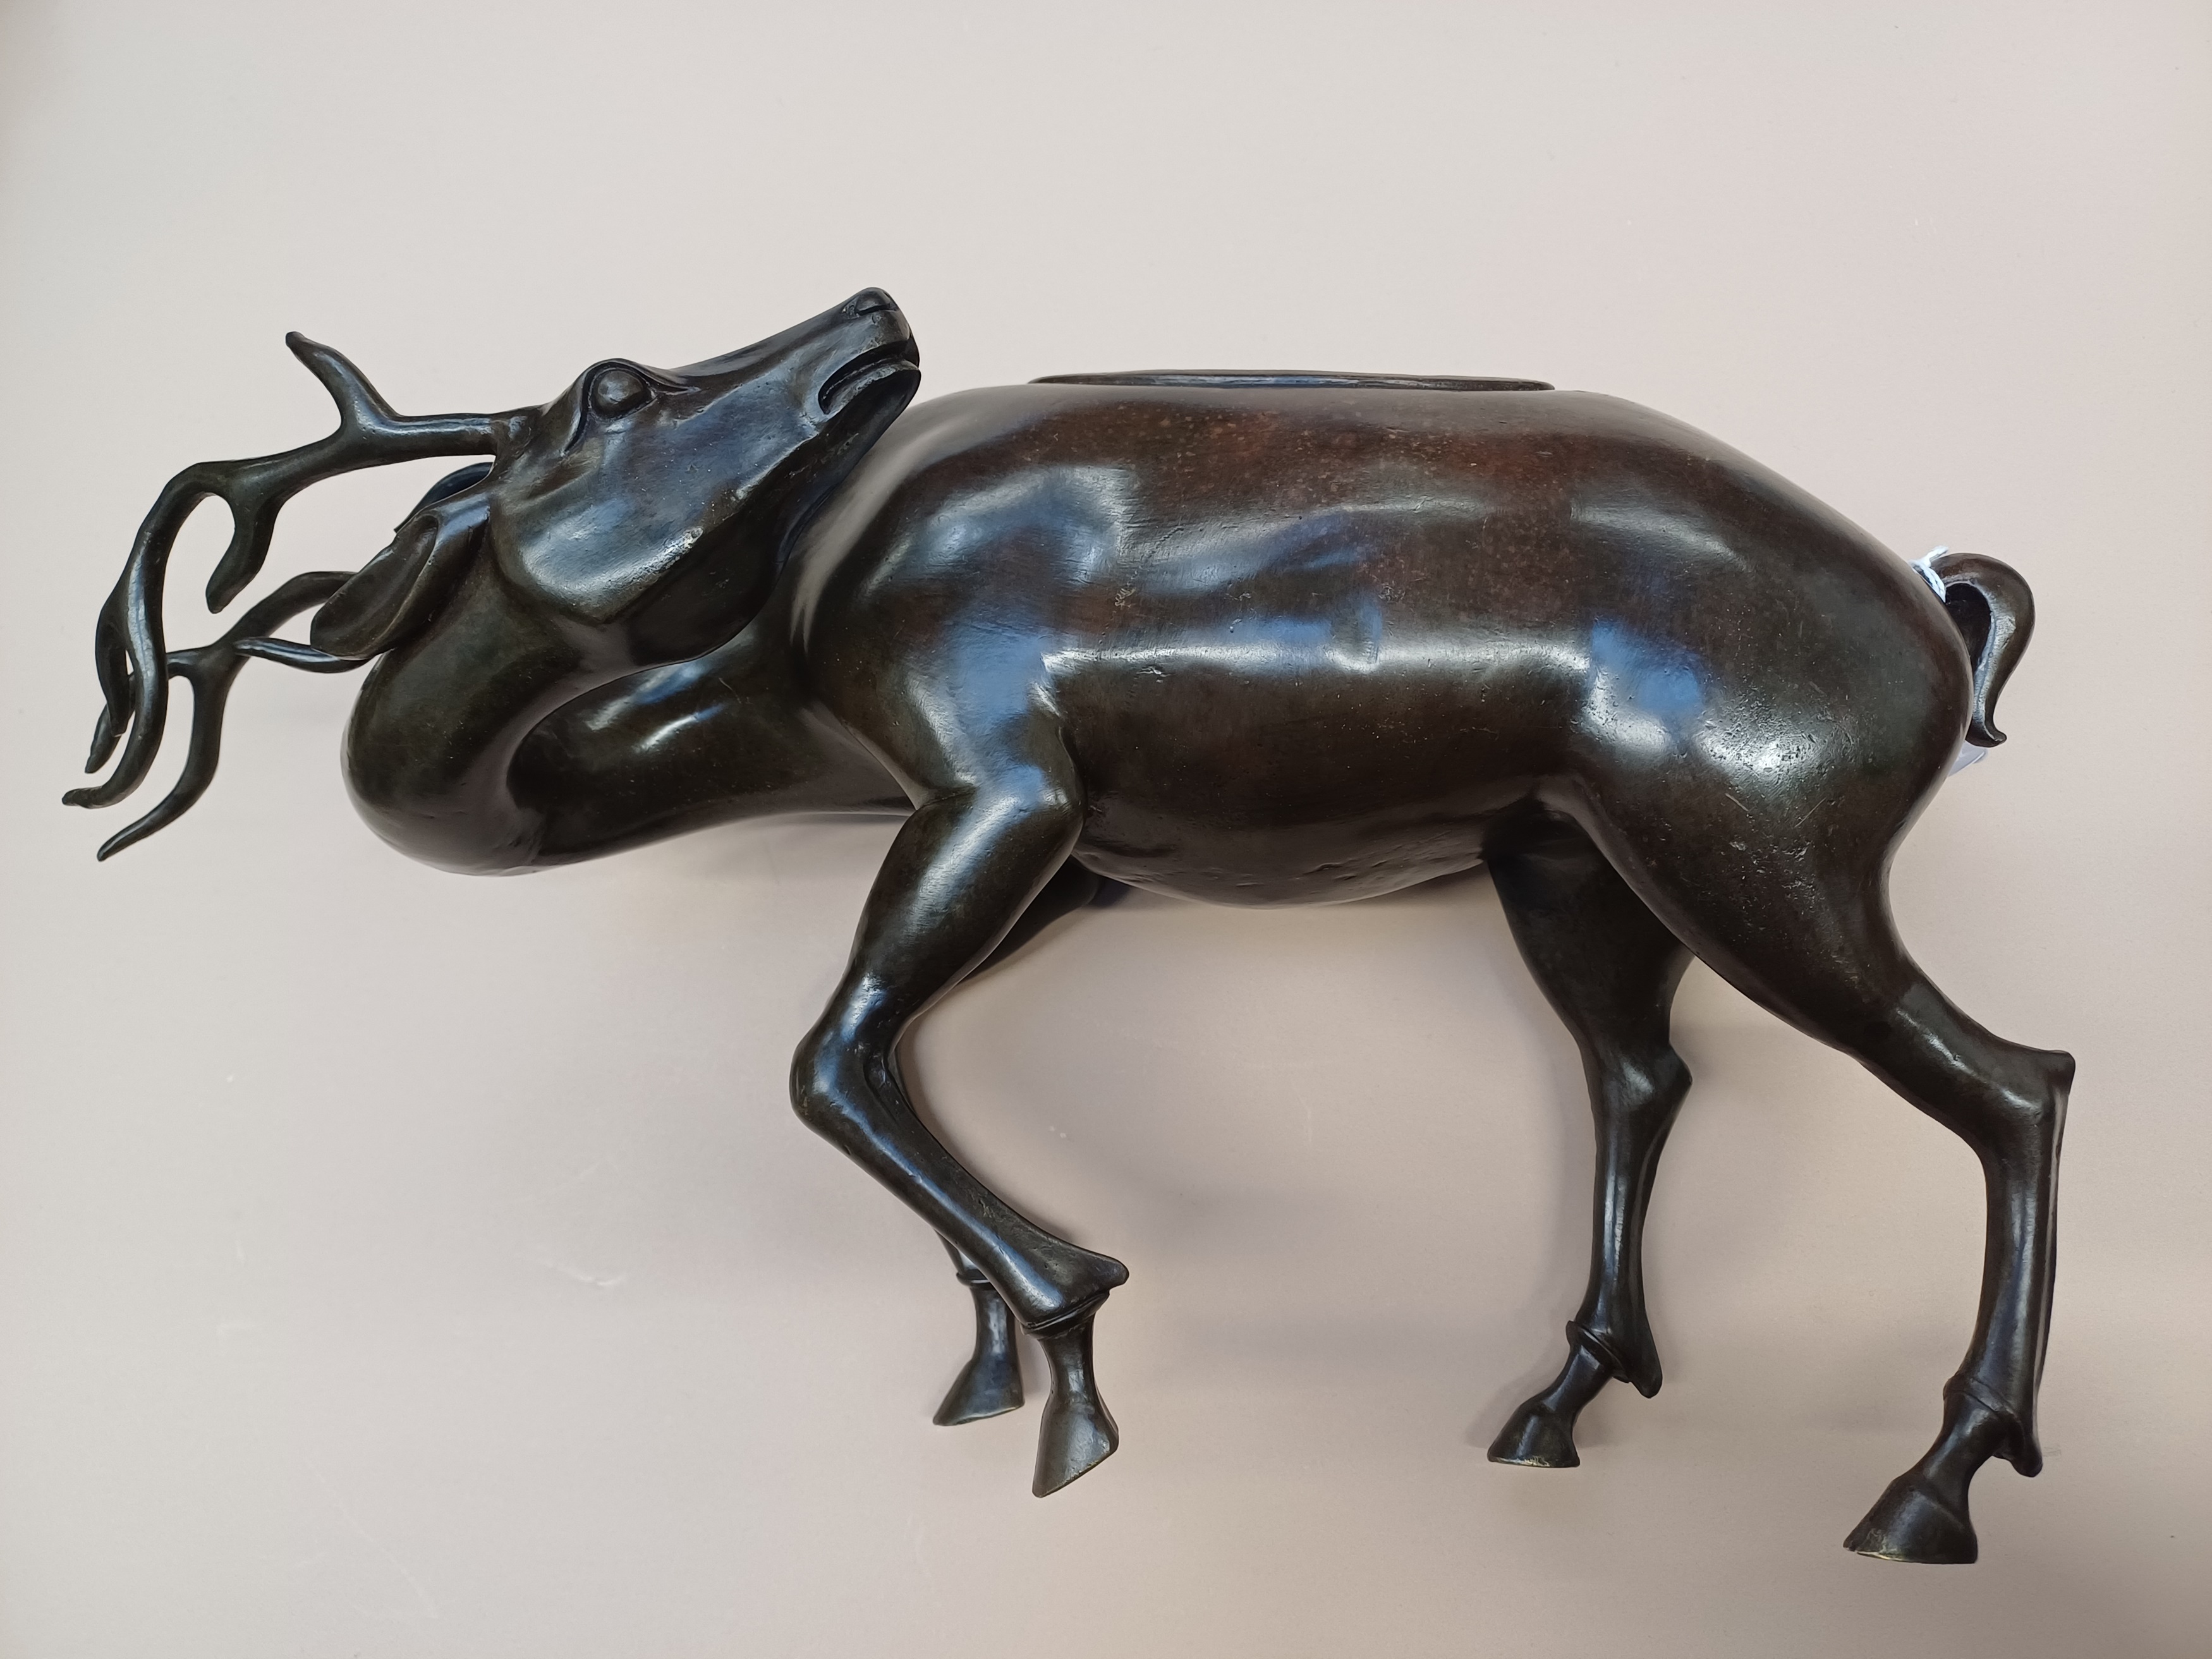 A LARGE CHINESE BRONZE 'SHOU LAO AND DEER' INCENSE BURNER 十七至十八世紀 銅壽老騎鹿熏爐 - Image 10 of 16